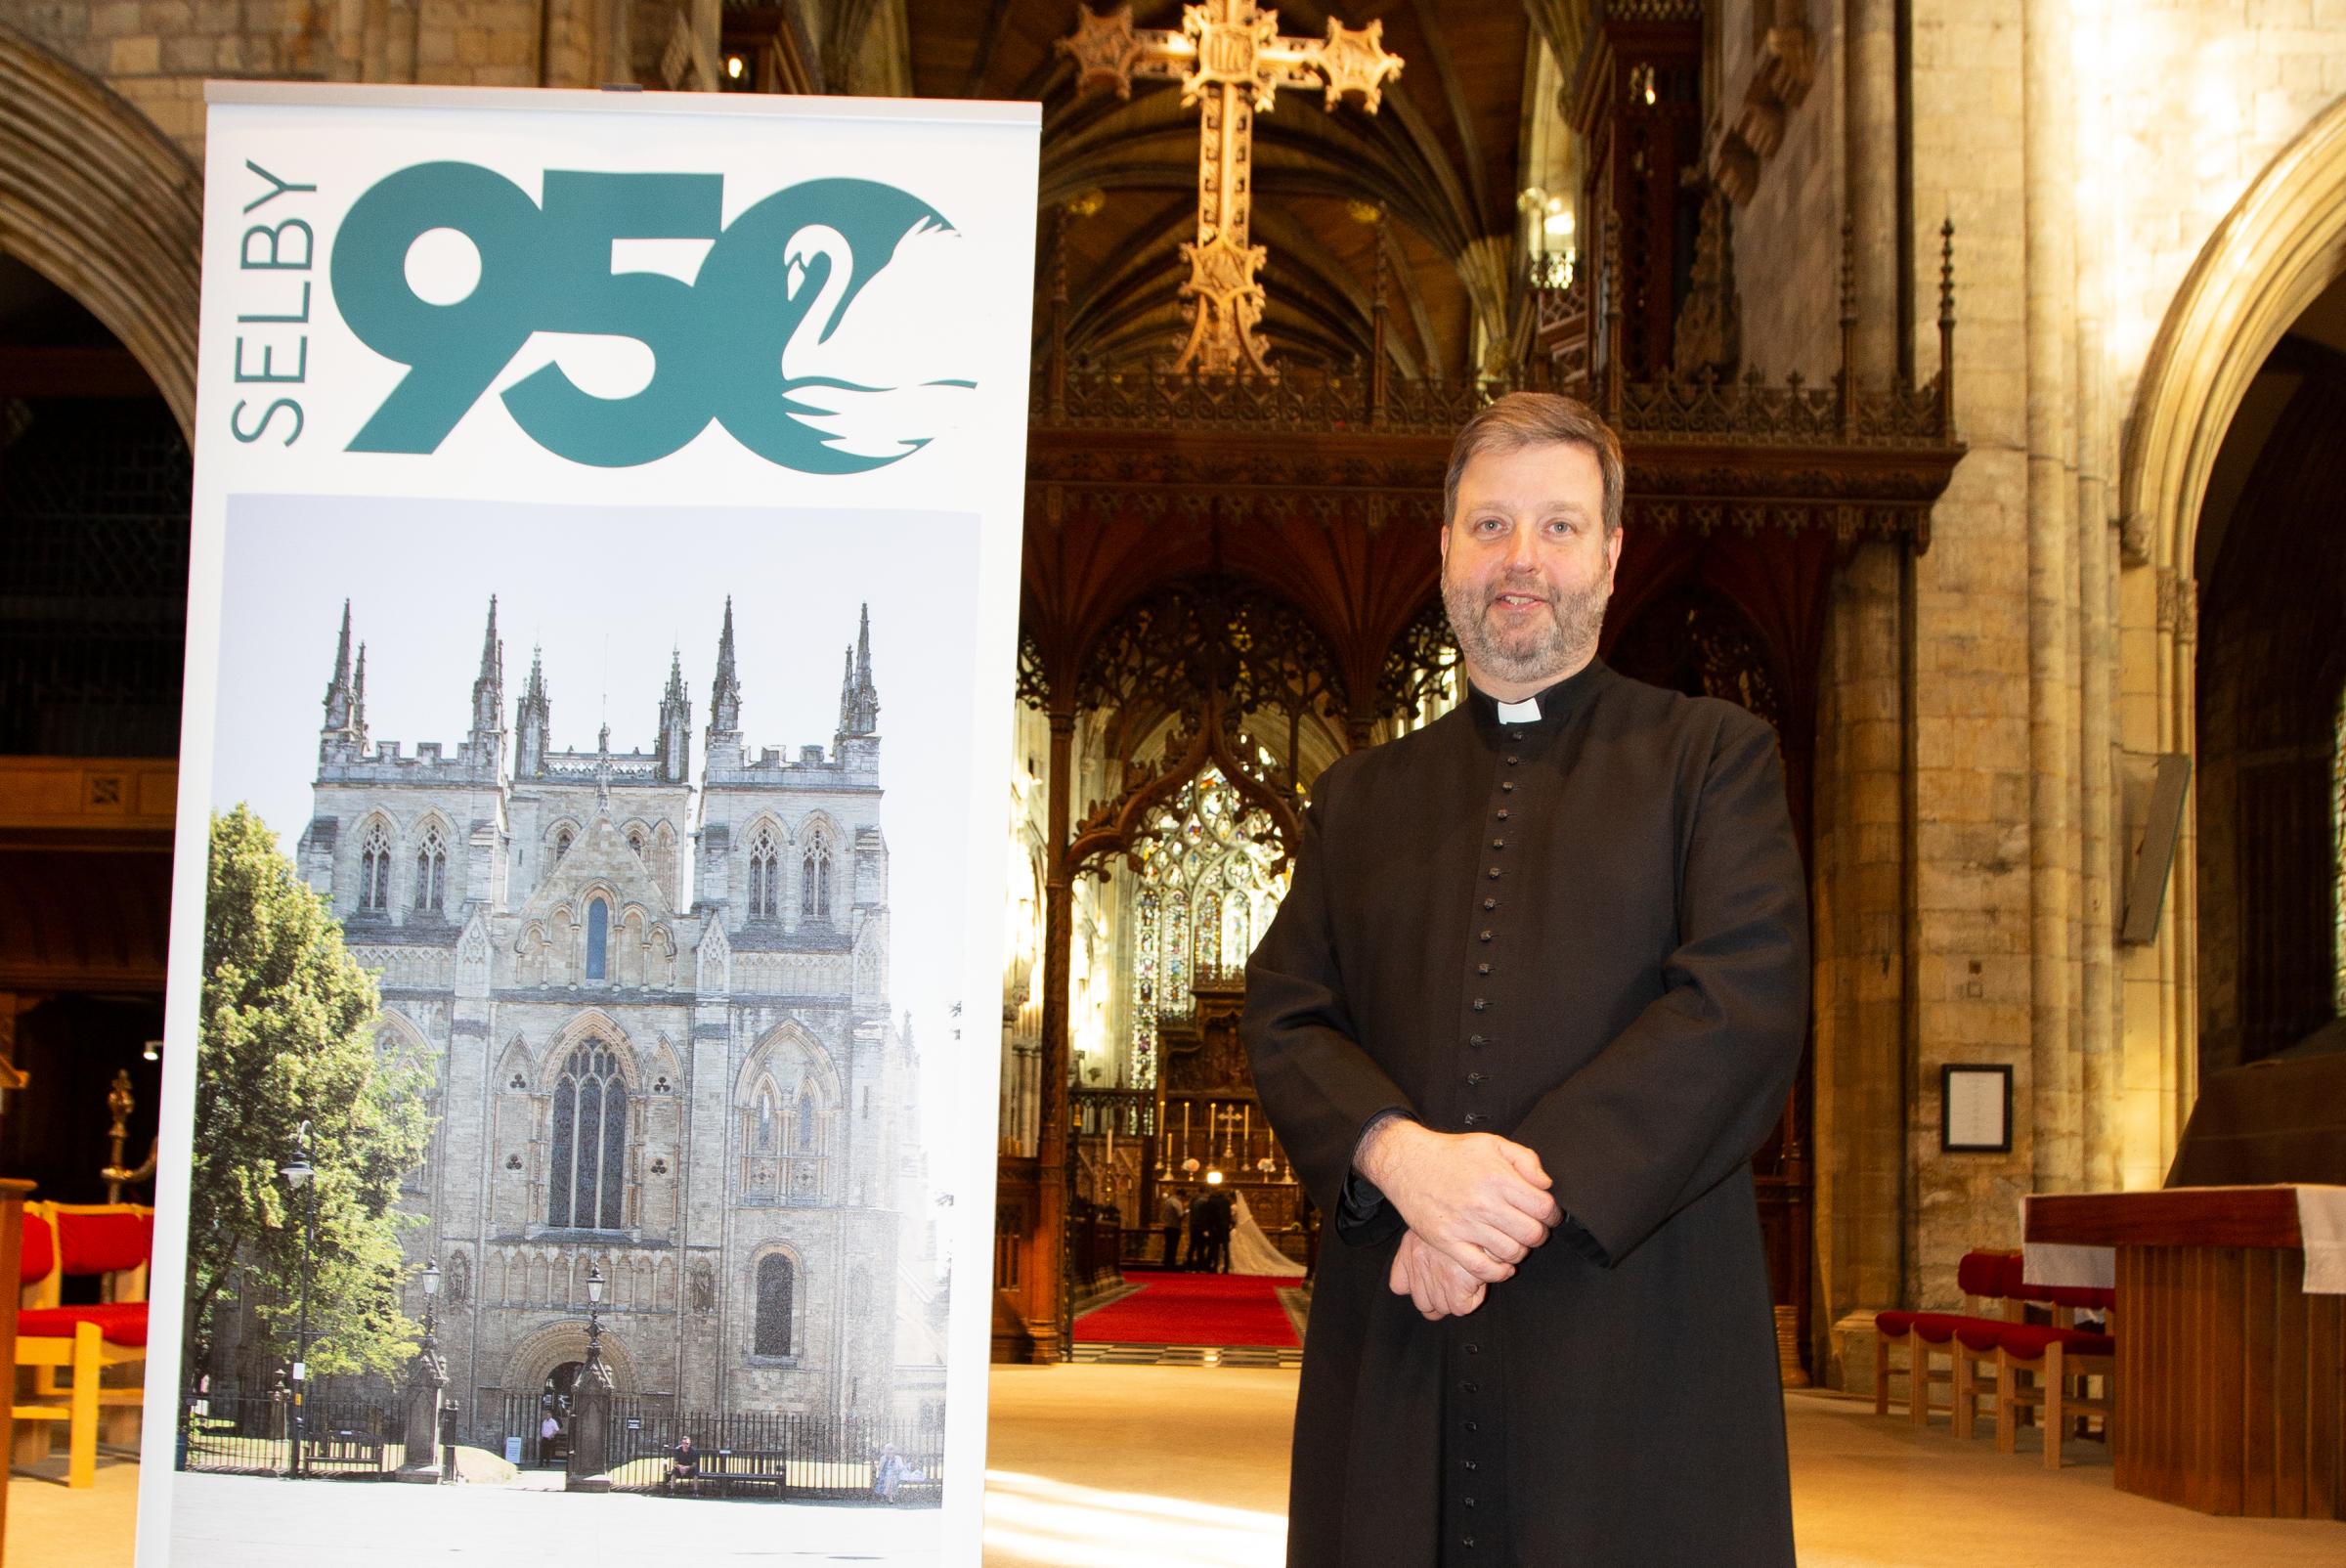 Carnival-style celebration to mark Selby Abbey's 950th